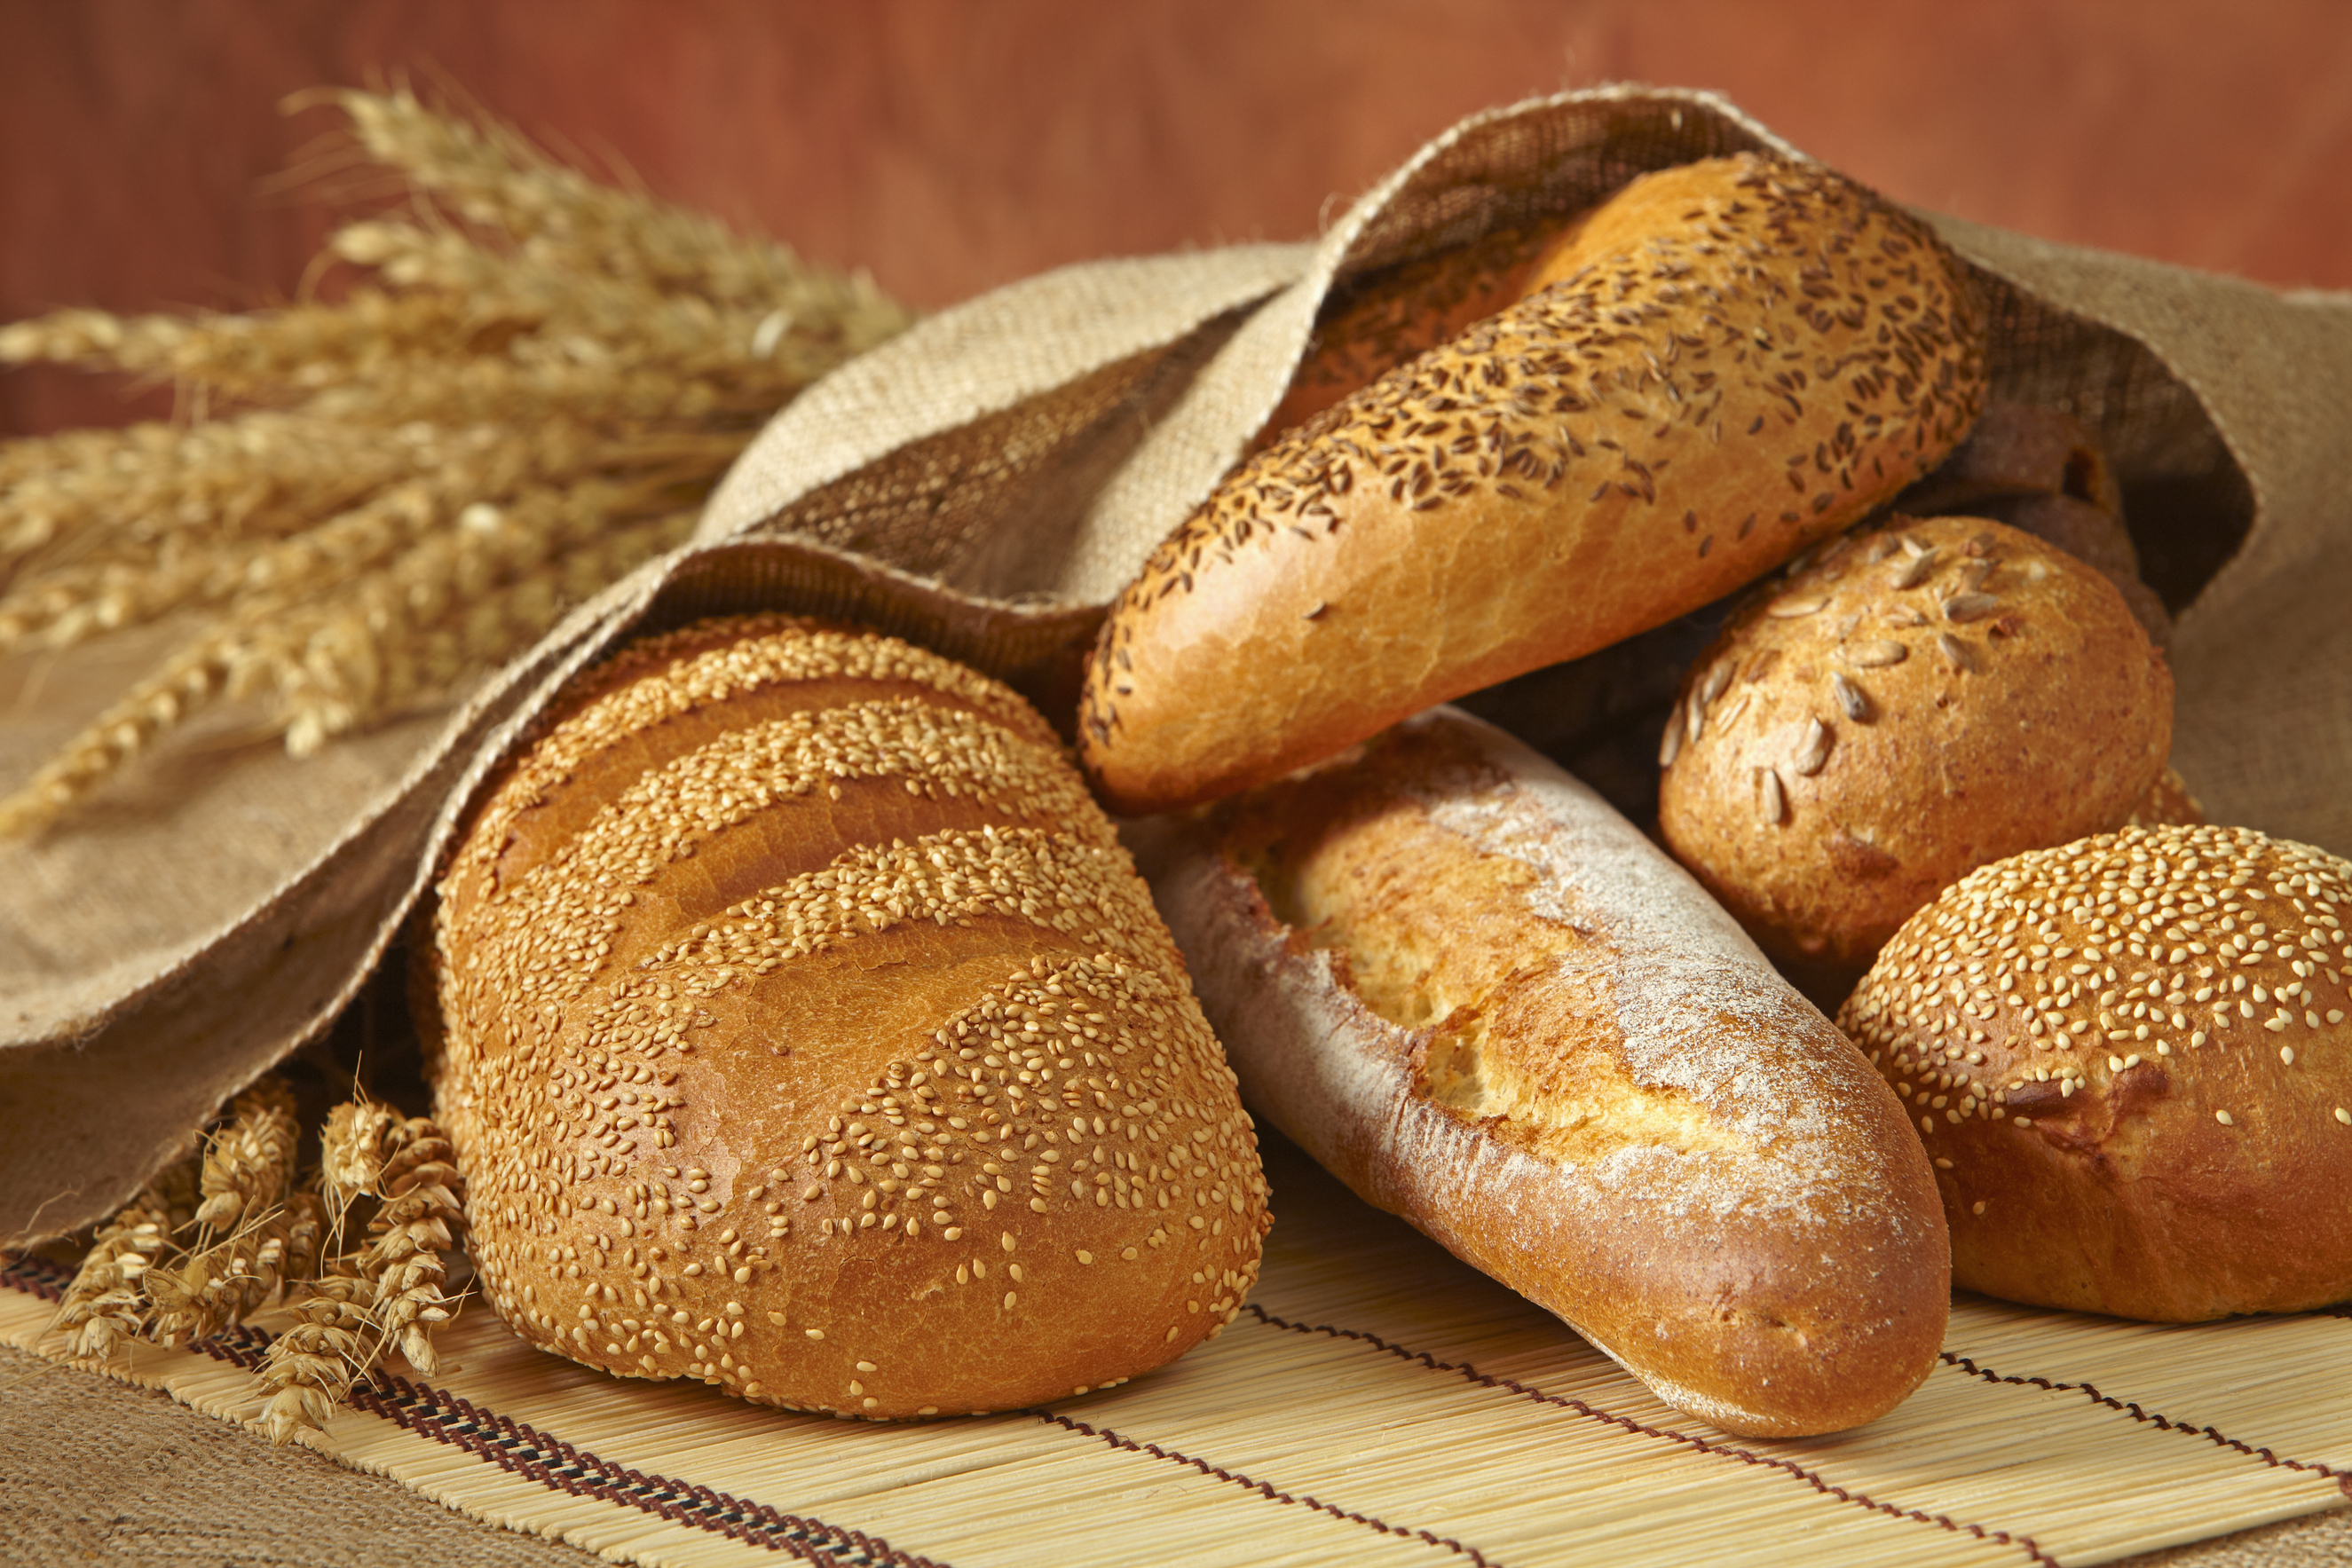 Flour, bread to be exempt from VAT in Azerbaijan